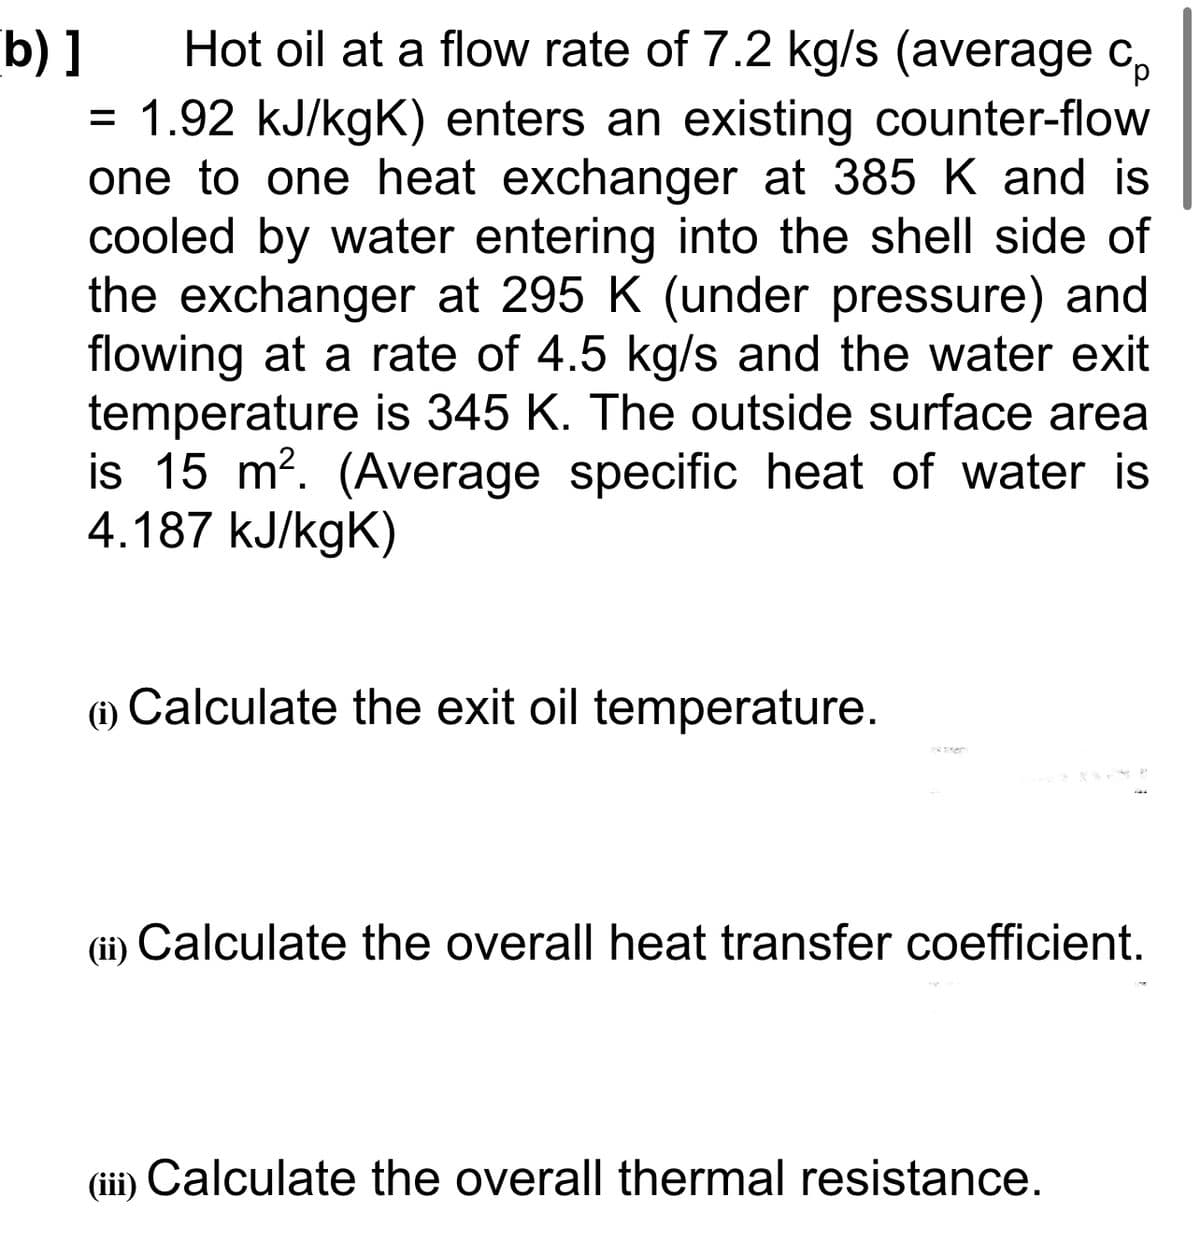 Hot oil at a flow rate of 7.2 kg/s (average c,
b) ]
= 1.92 kJ/kgK) enters an existing counter-flow
one to one heat exchanger at 385 K and is
cooled by water entering into the shell side of
the exchanger at 295 K (under pressure) and
flowing at a rate of 4.5 kg/s and the water exit
temperature is 345 K. The outside surface area
is 15 m?. (Average specific heat of water is
4.187 kJ/kgK)
(1) Calculate the exit oil temperature.
(i)
(ii) Calculate the overall heat transfer coefficient.
(iii) Calculate the overall thermal resistance.
